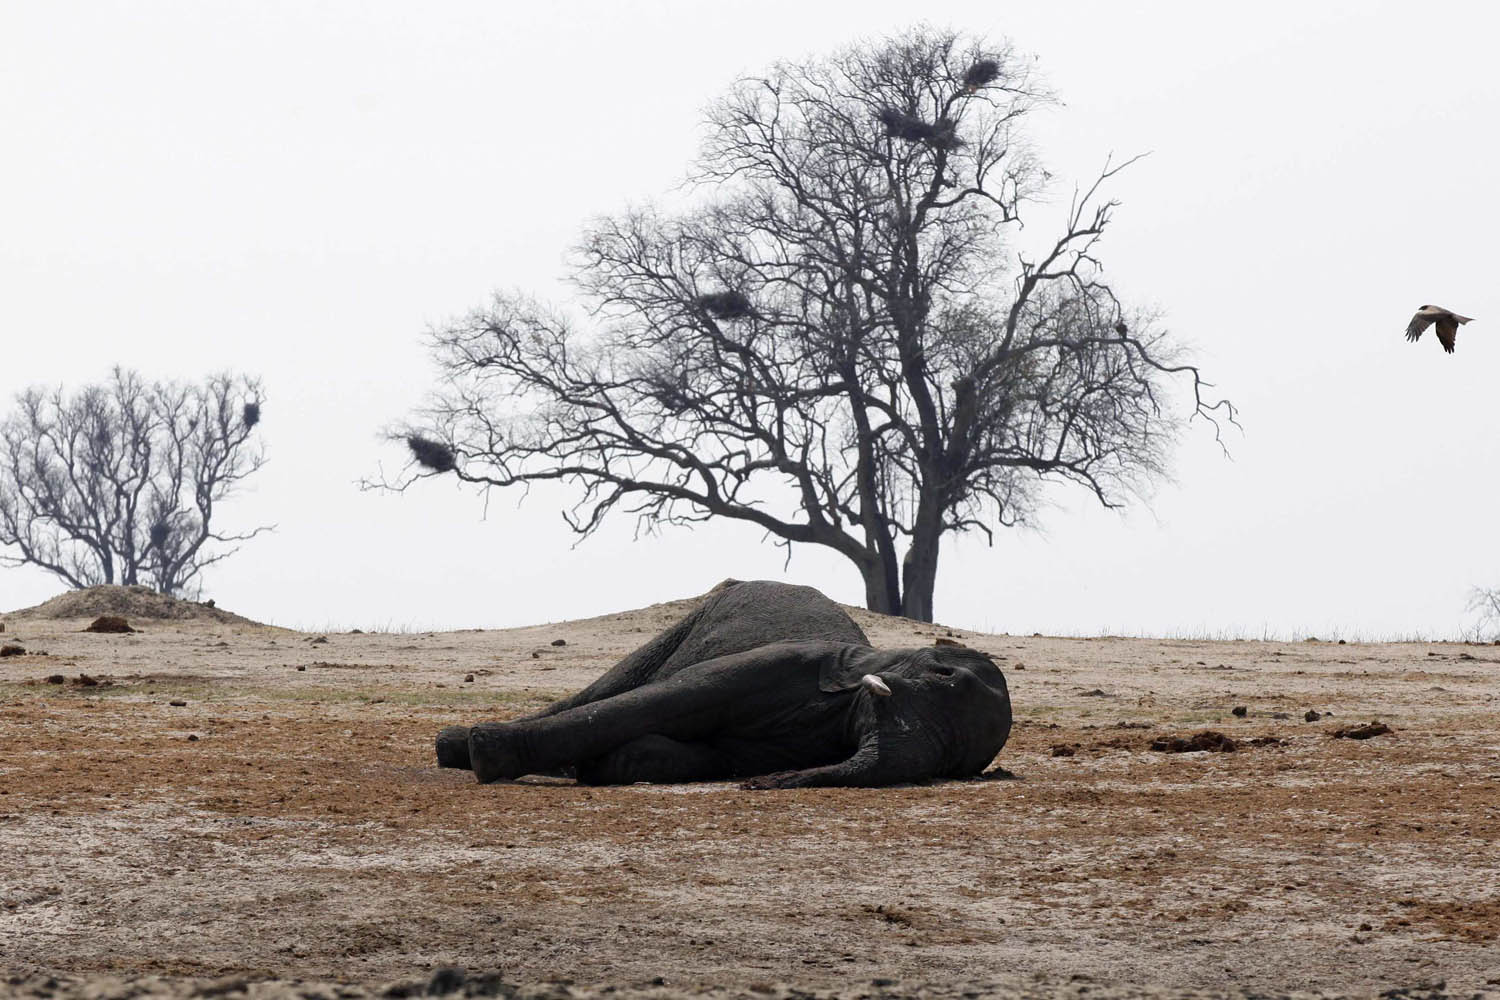 Sept. 27, 2013. A bird flies near the carcass of an elephant, which was killed after drinking from a poisoned water hole, in Zimbabwe's Hwange National Park, about 840 km (522 miles) east of Harare.